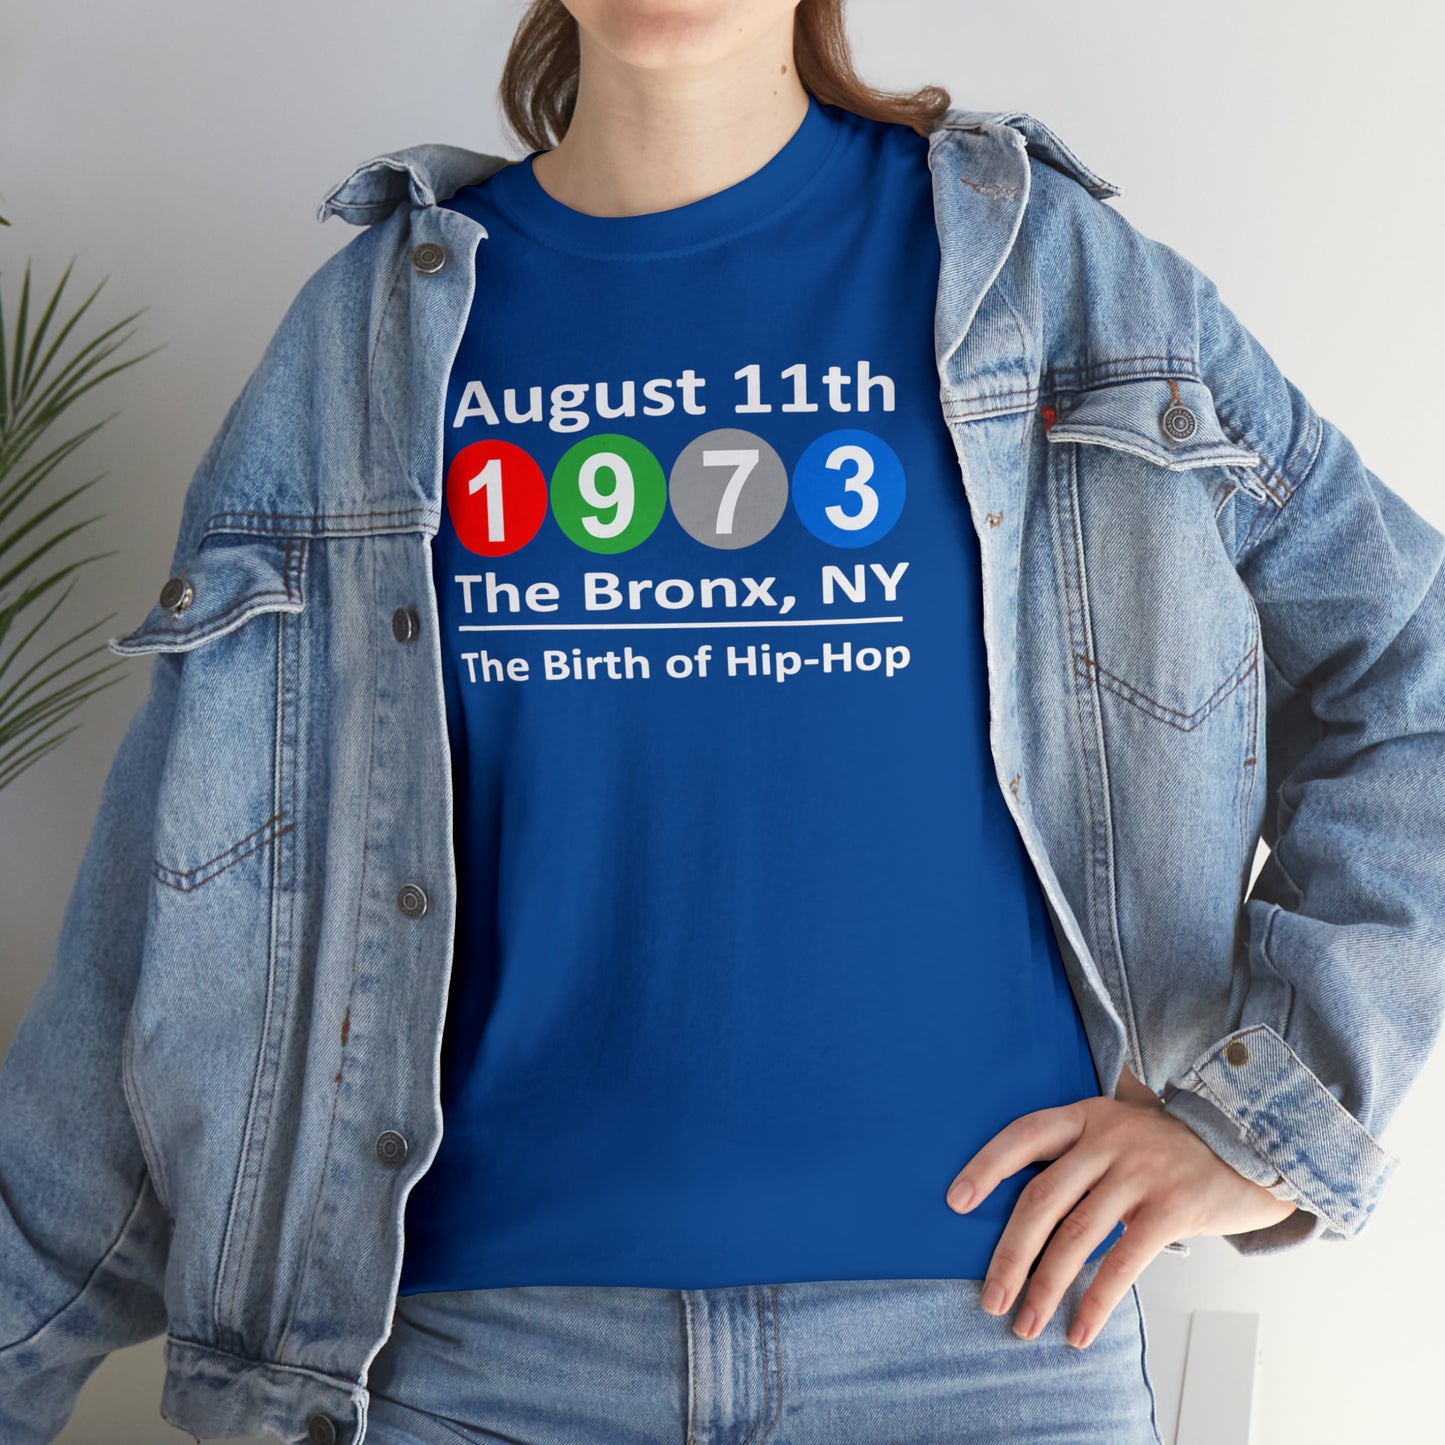 August 11th, 1973 The Bronx, NY The Birth of Hip-Hop Shirt Great gift for a Hip-Hop & Rap Lover, Hip Hop T-Shirt, Rap Tee